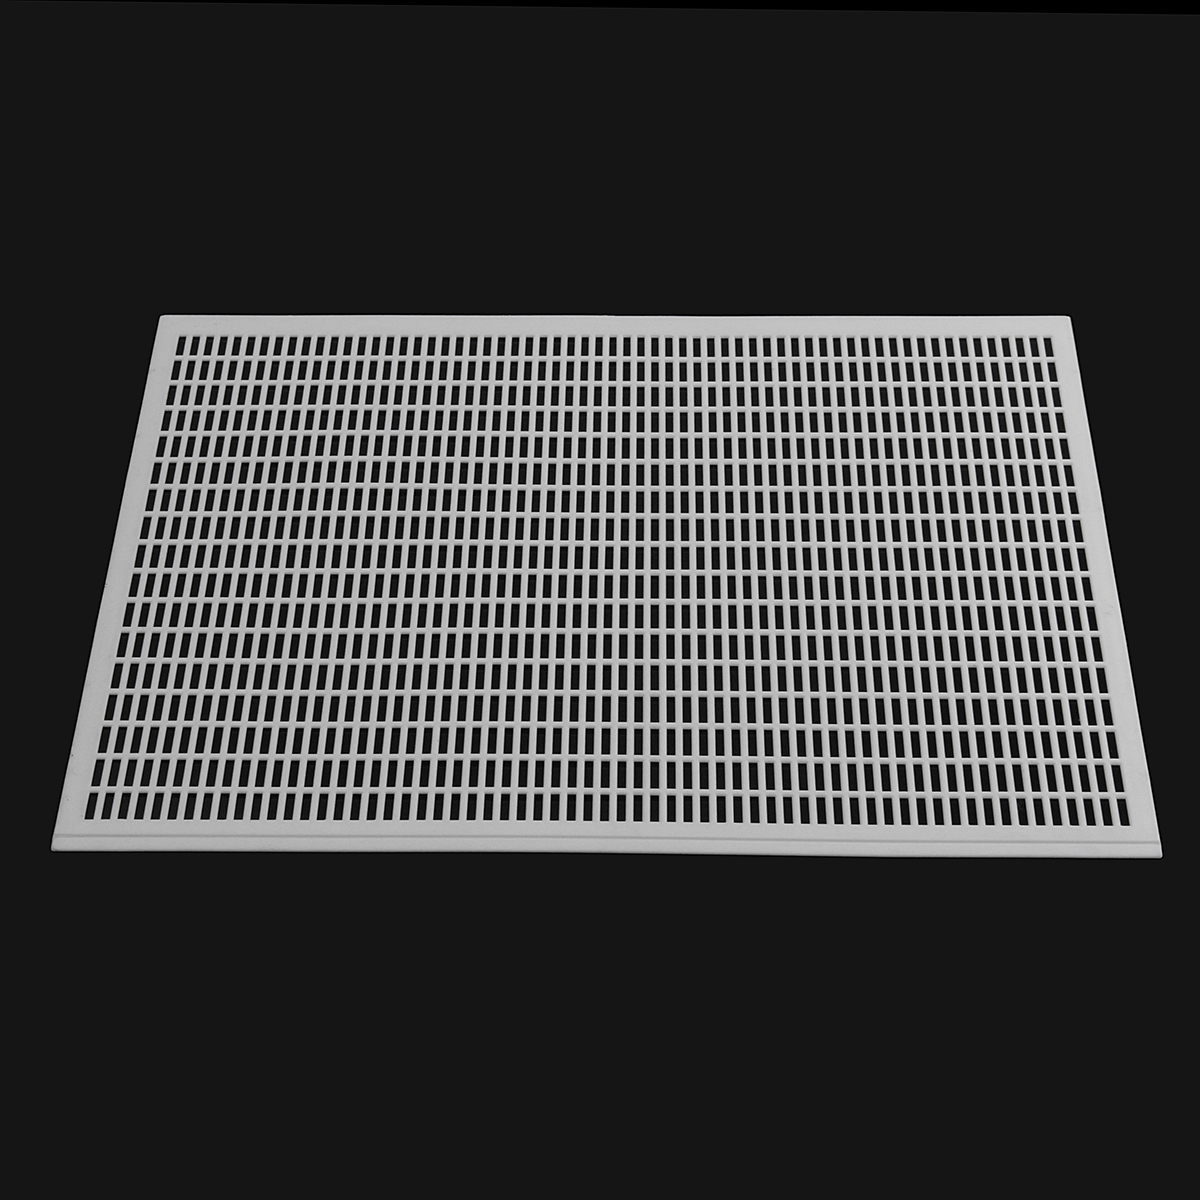 

41x51cm Bee Queen Excluder Plastic Trapping Grid Net Beekeeping Frame